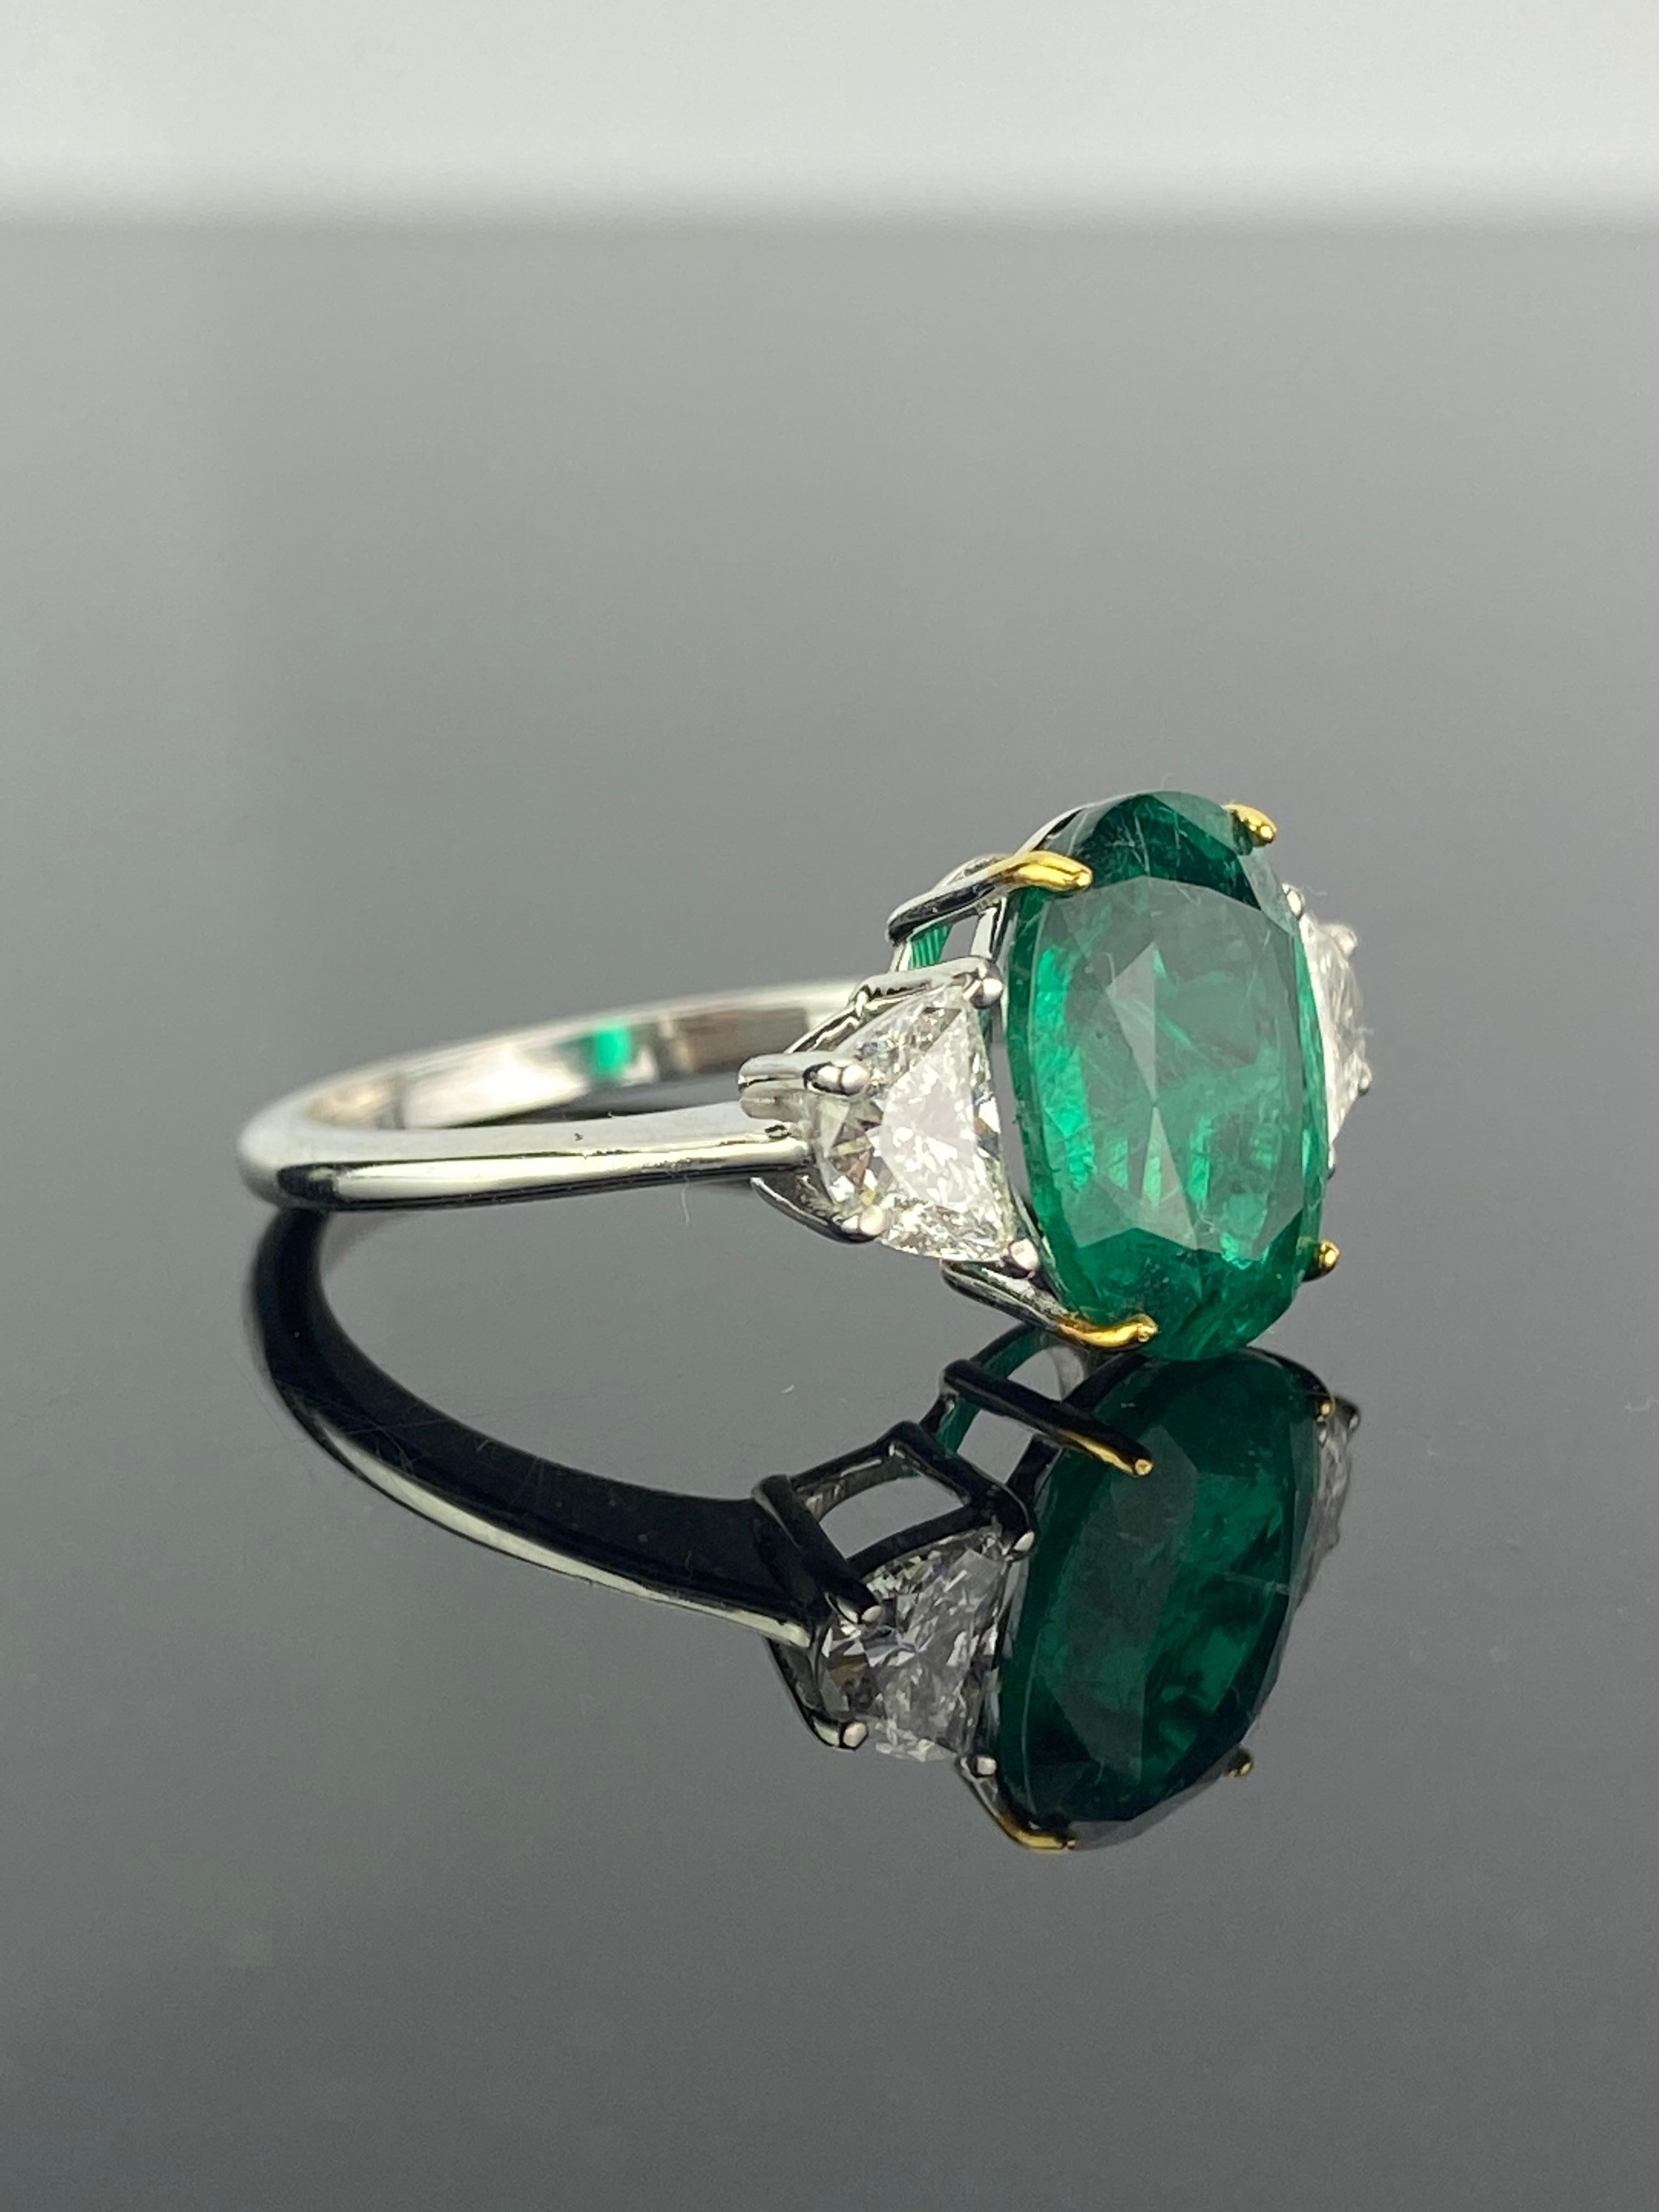 A beautiful three stone engagement ring, with a 2.68 carat transparent natural Zambian Emerald centre stone and 0.53 carat half-moon side stone diamonds. The emerald is of great lustre and has an ideal colour with very few minor inclusions. All set